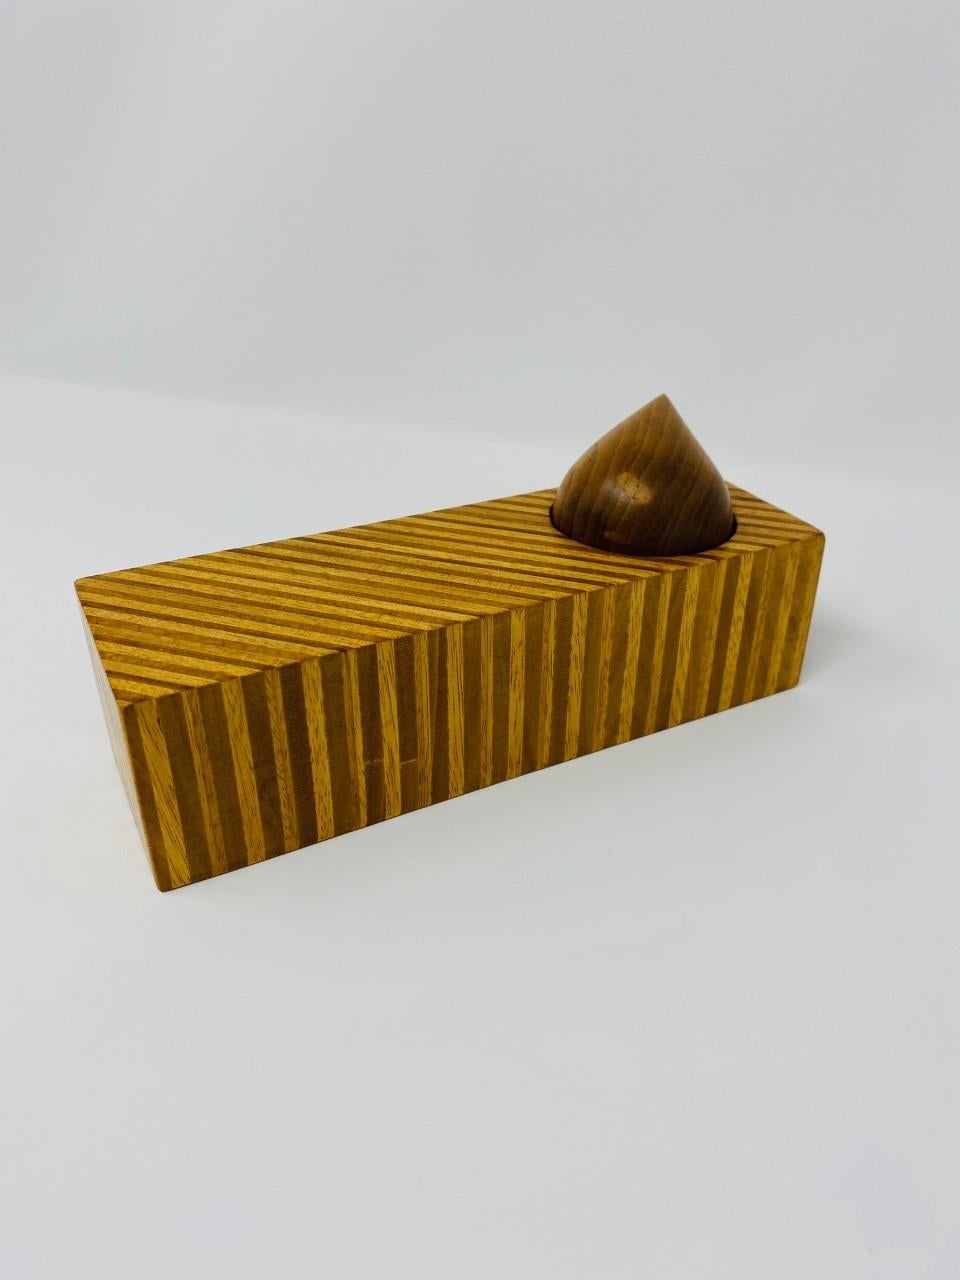 Postmodern Memphis style mixed wood trinket box in the style of Russ Keil, circa 1980s. The box is 7.25